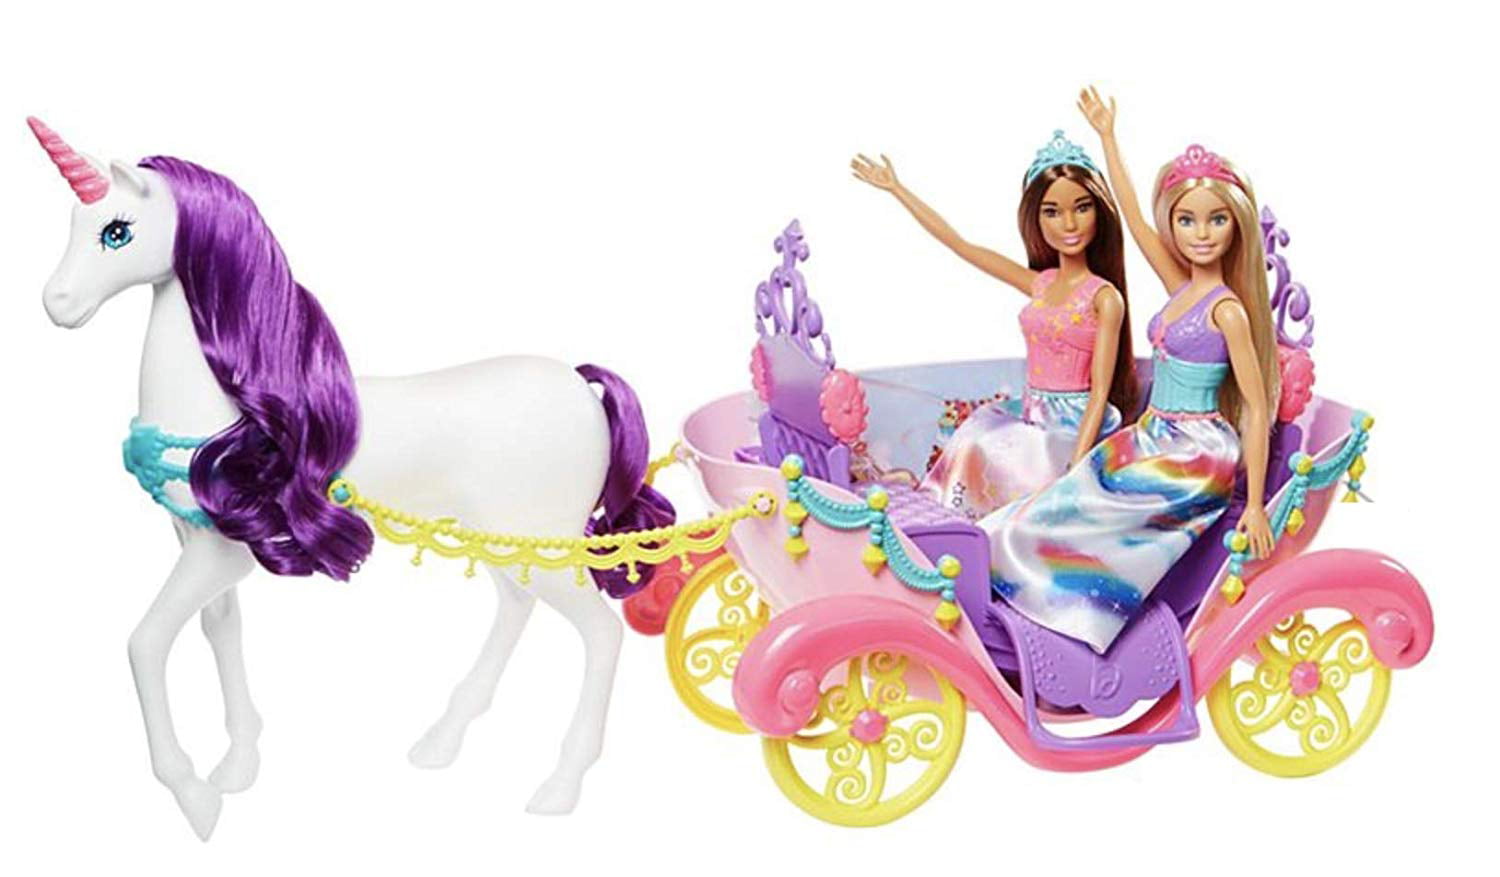 barbie doll carriage